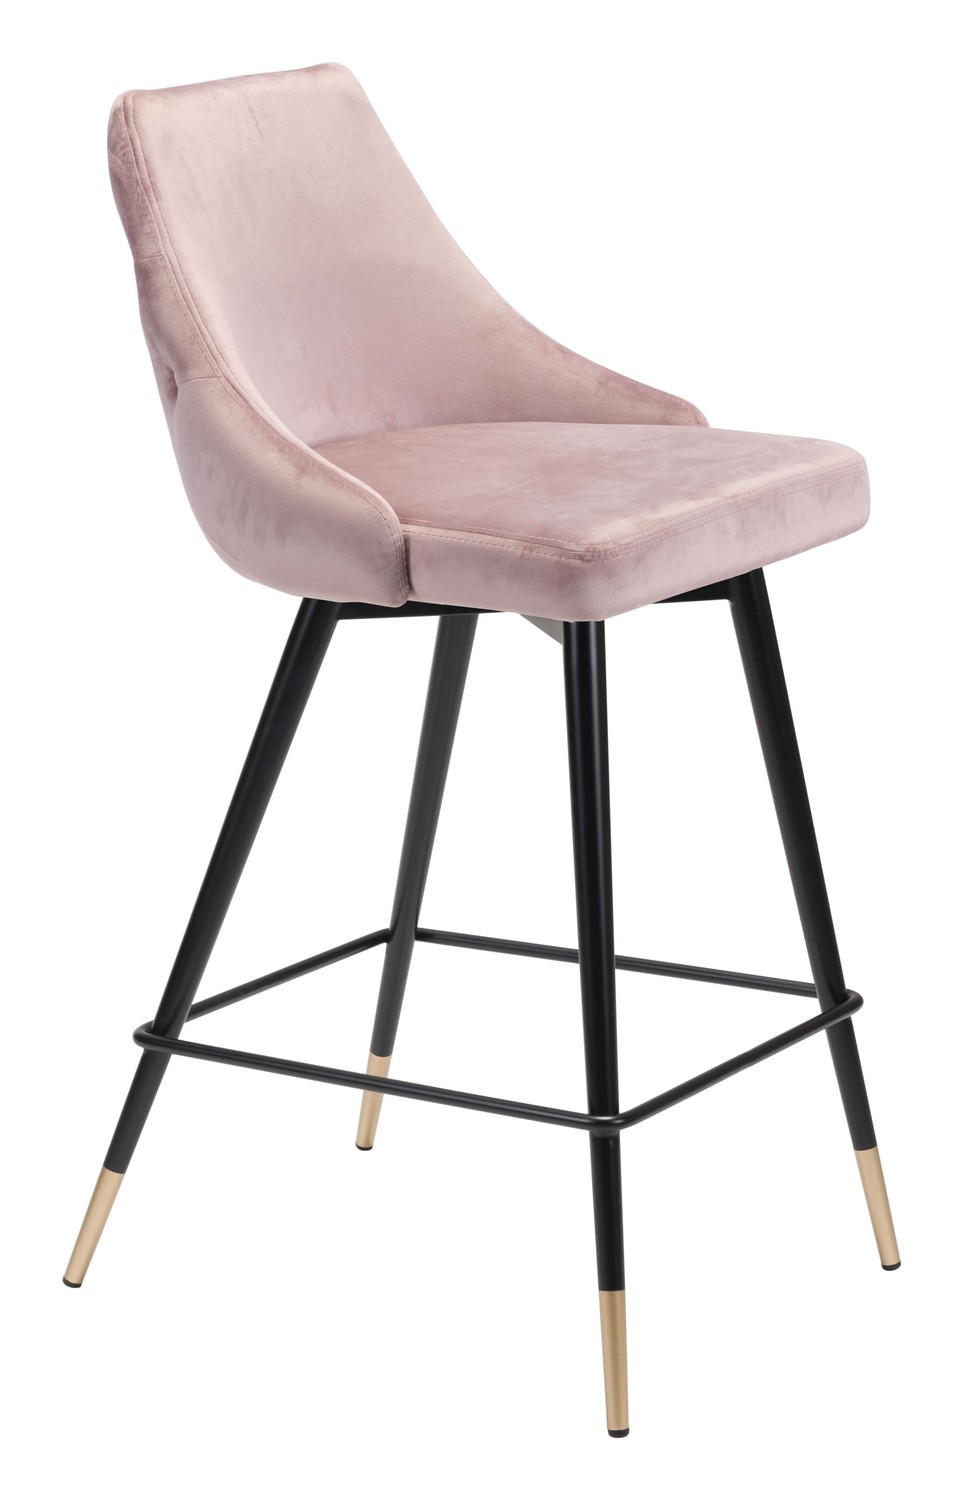 18.5" x 20.9" x 36.4" Pink, Velvet, Stainless Steel, Counter Chair